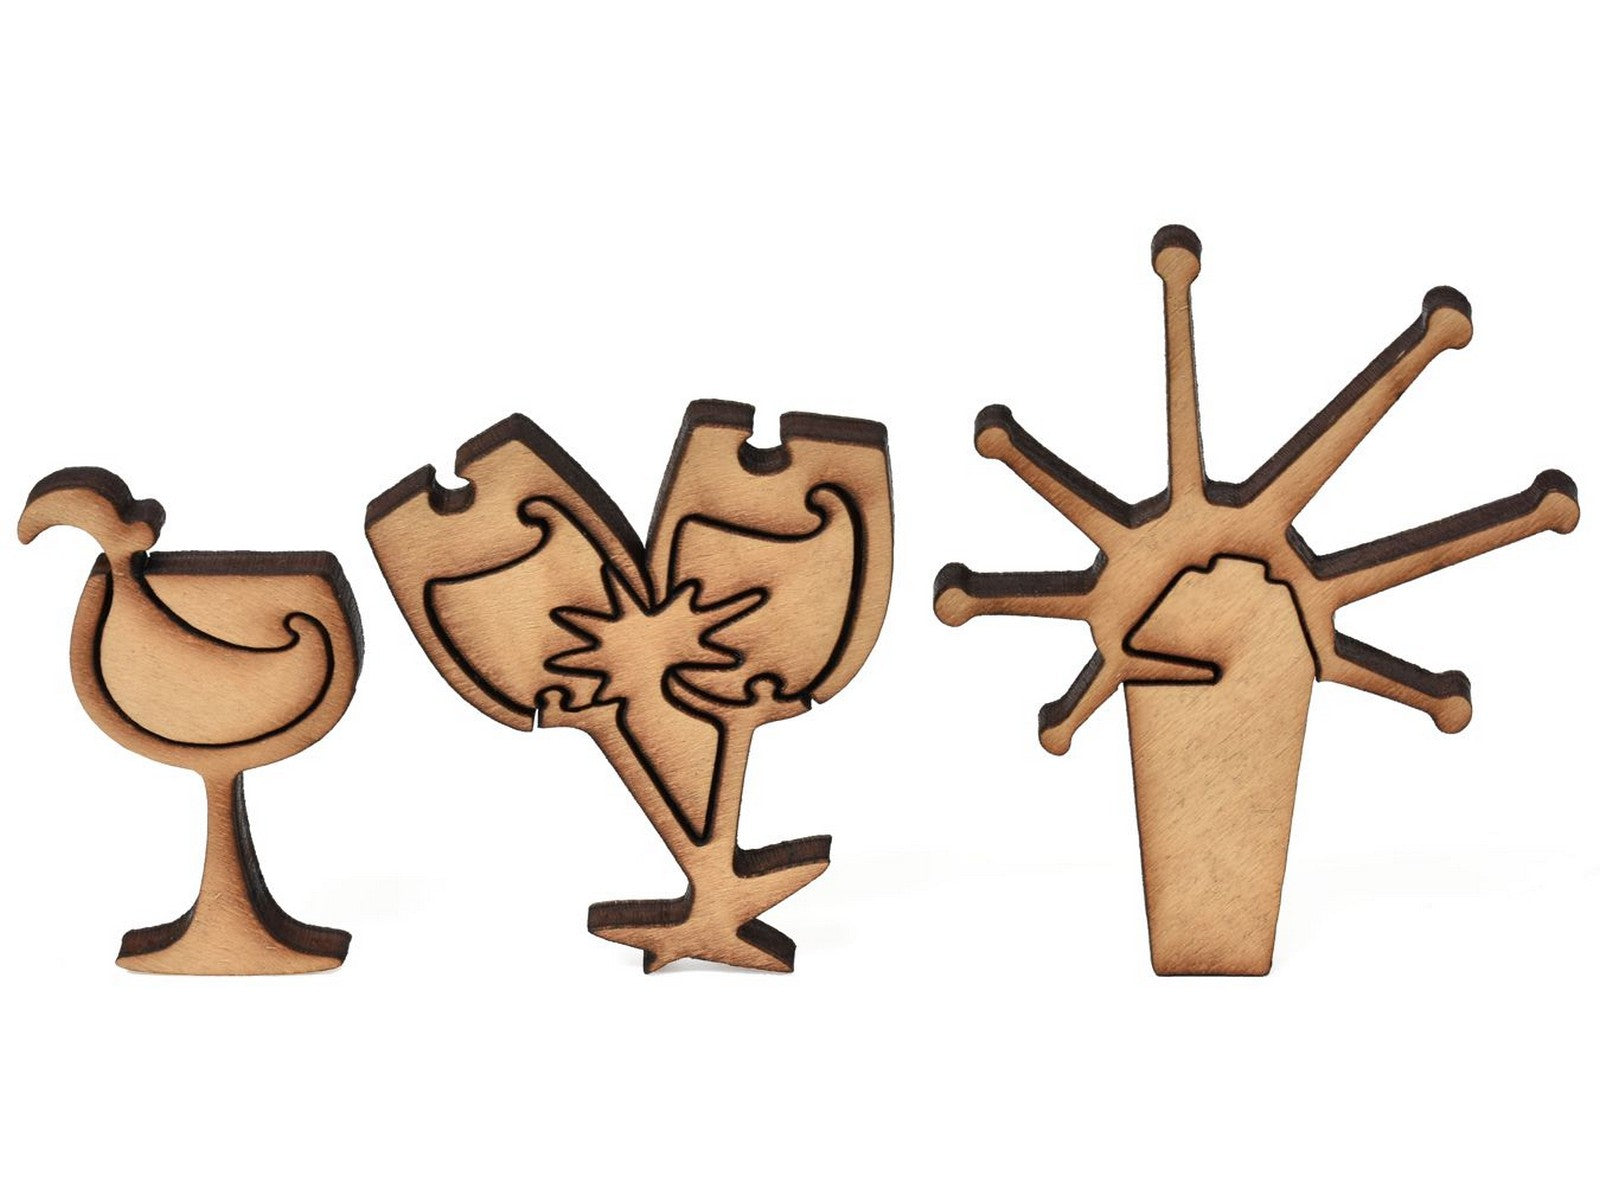 A closeup of pieces showing a cocktail shaker and champagne glasses.